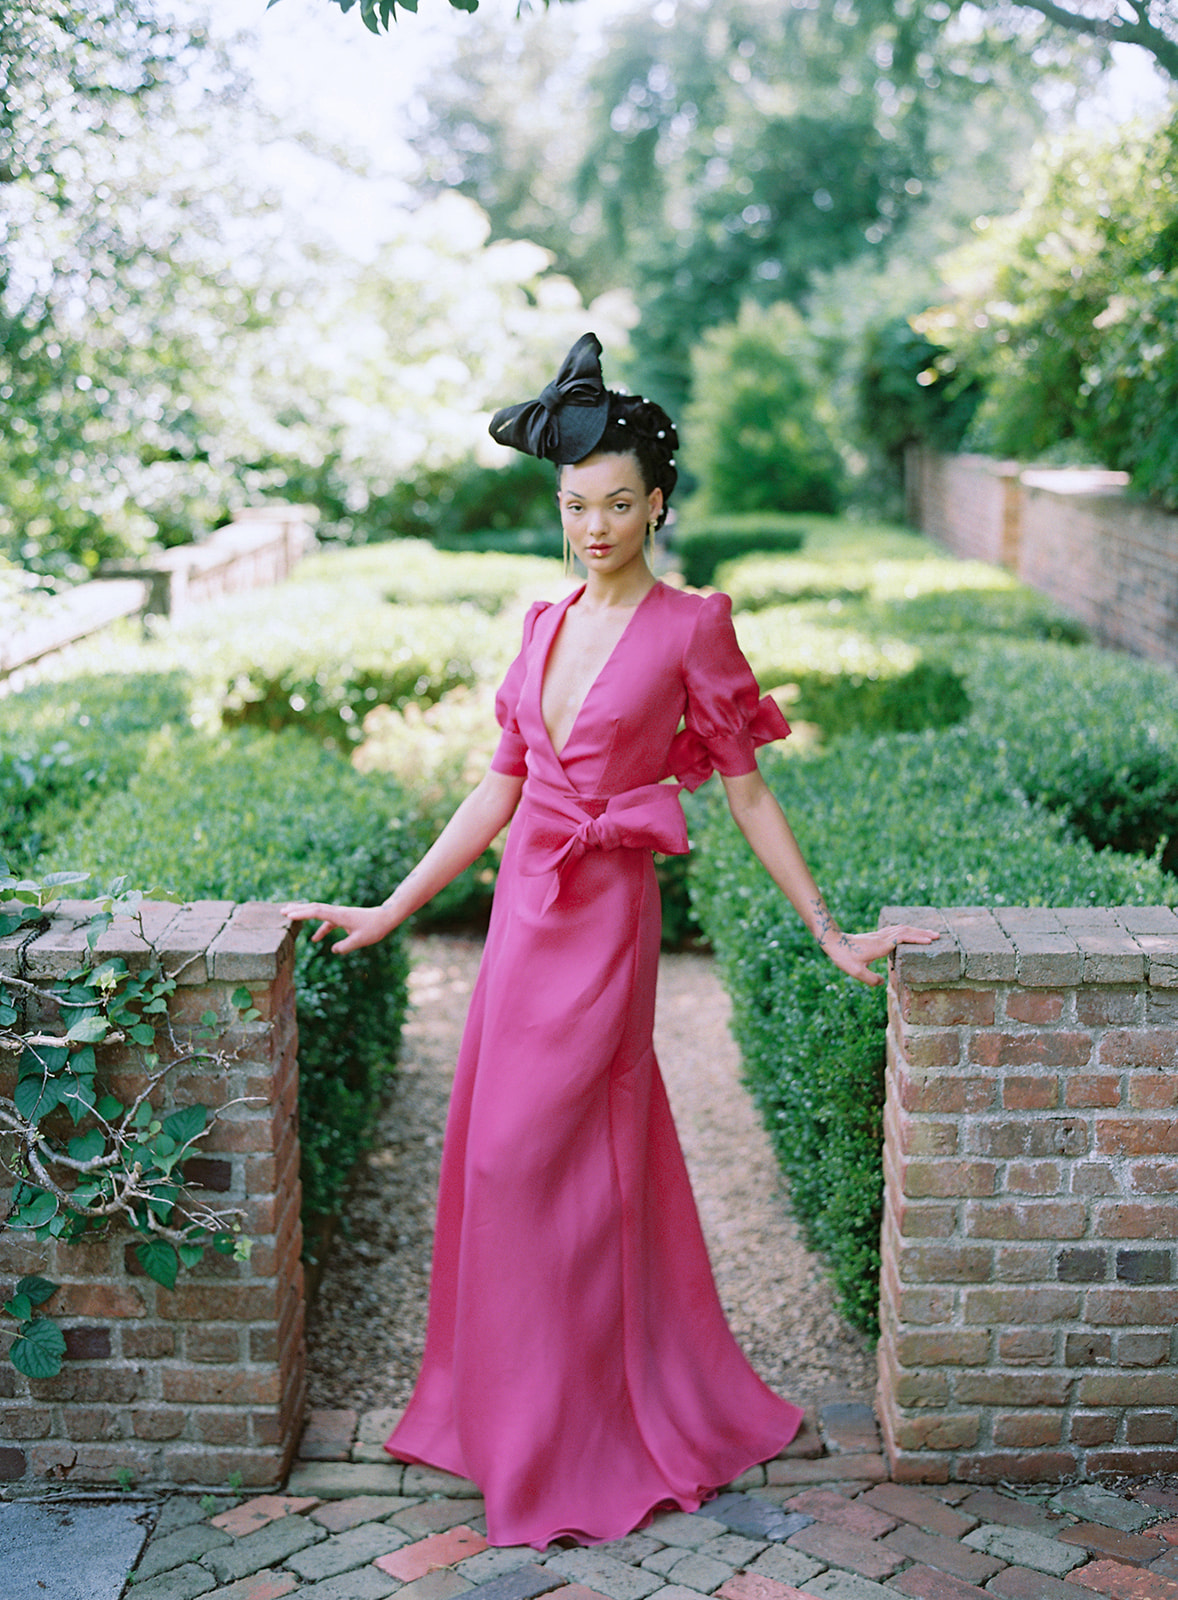 Model in a pink gown with a black hat in an english garden